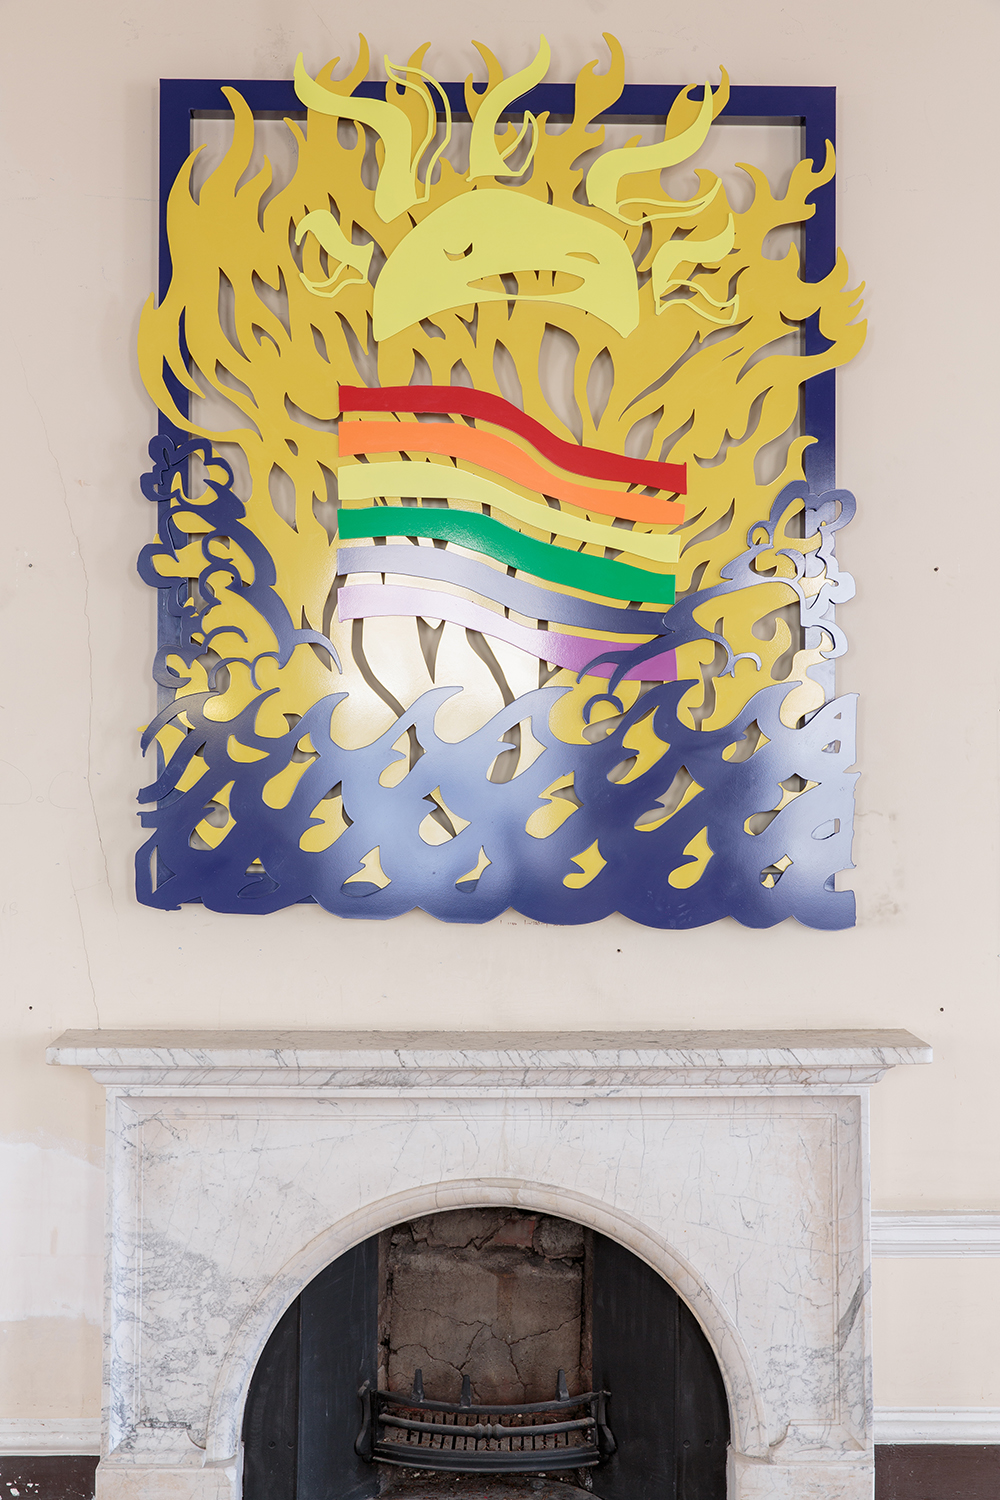 Installation view of UK Gay Bar Directory. The image shows an artwork on the wall above a fireplace, depicting smiling sun and a rainbow flag.